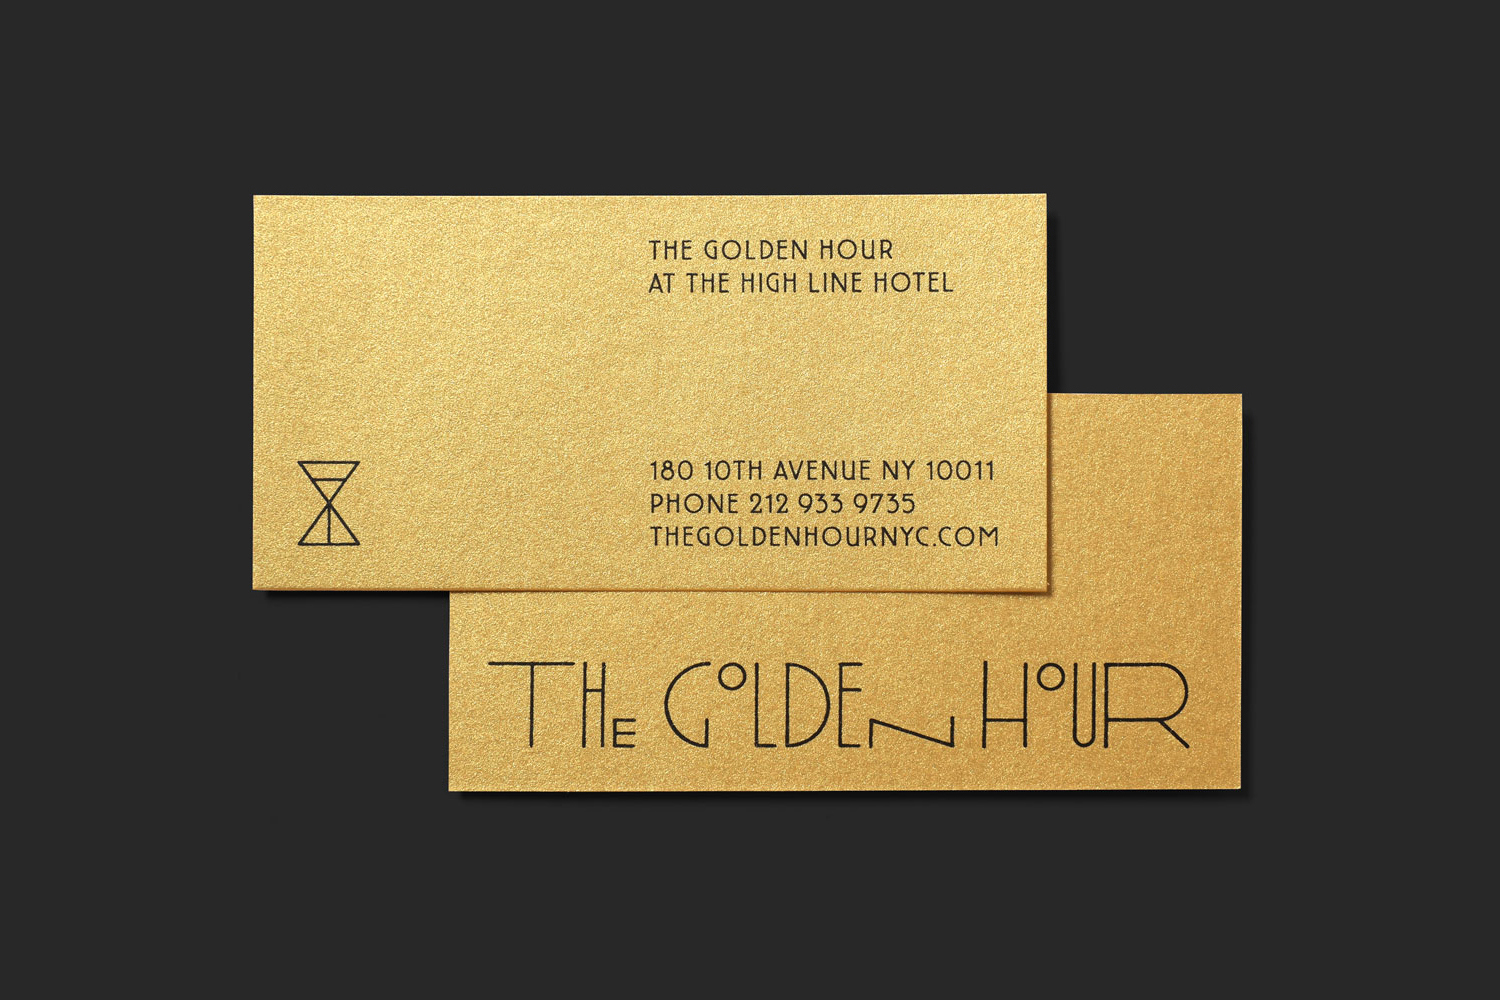 Creative Business Cards – The Golden Hour by Triboro